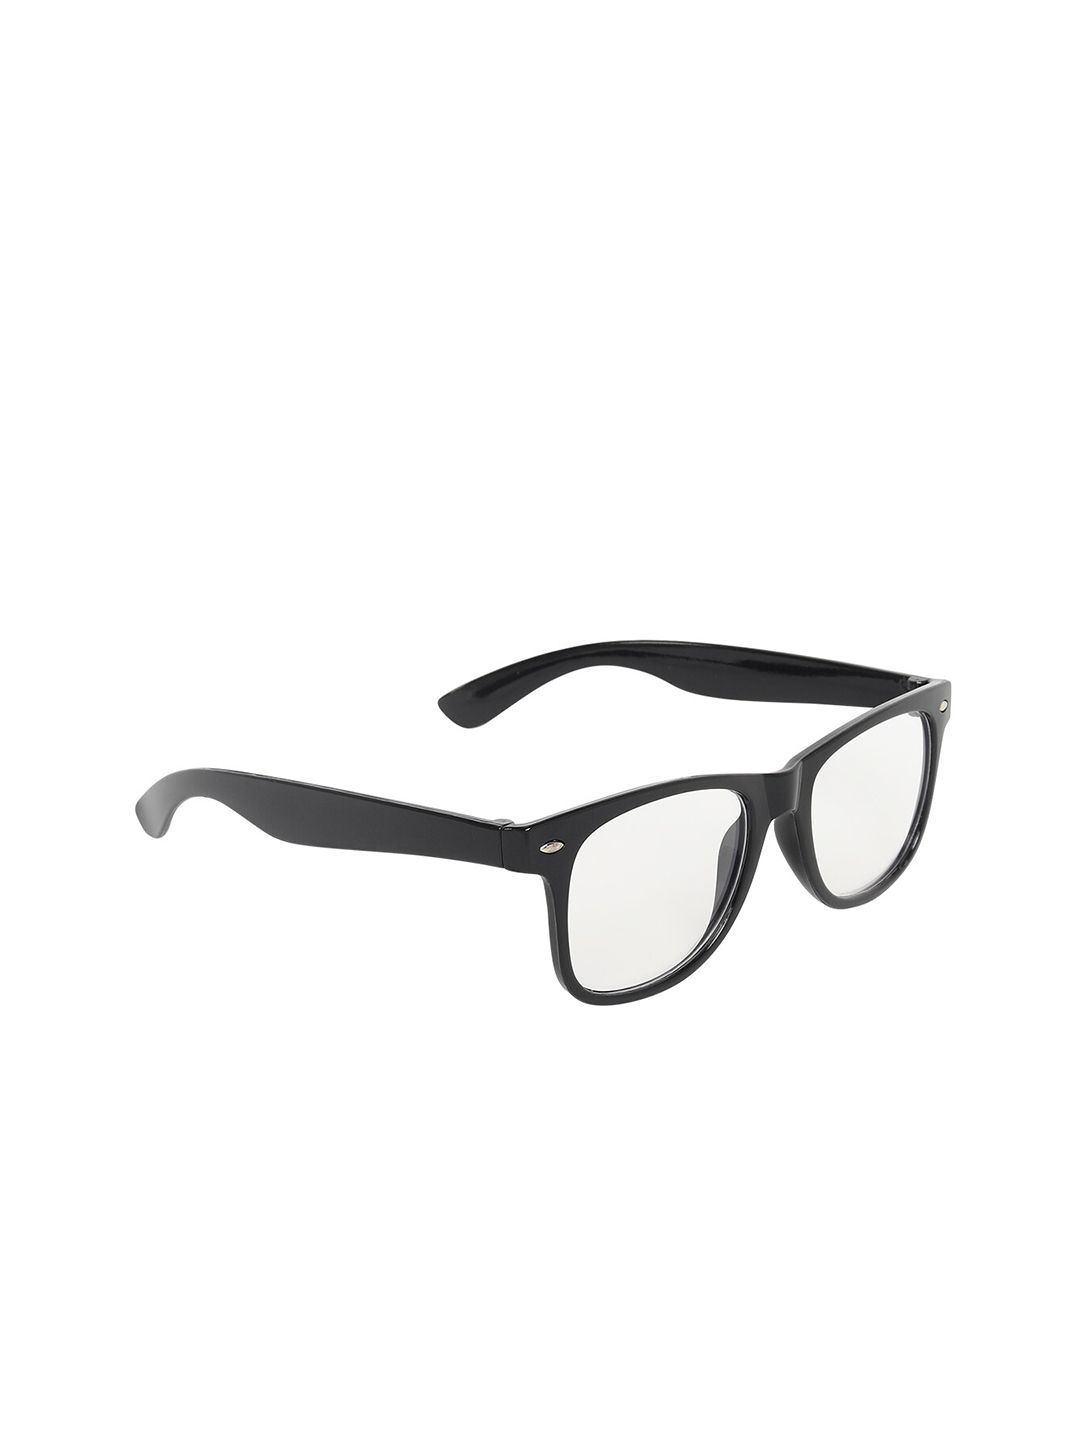 CRIBA Unisex Clear Lens & Black Wayfarer Sunglasses with UV Protected Lens Price in India